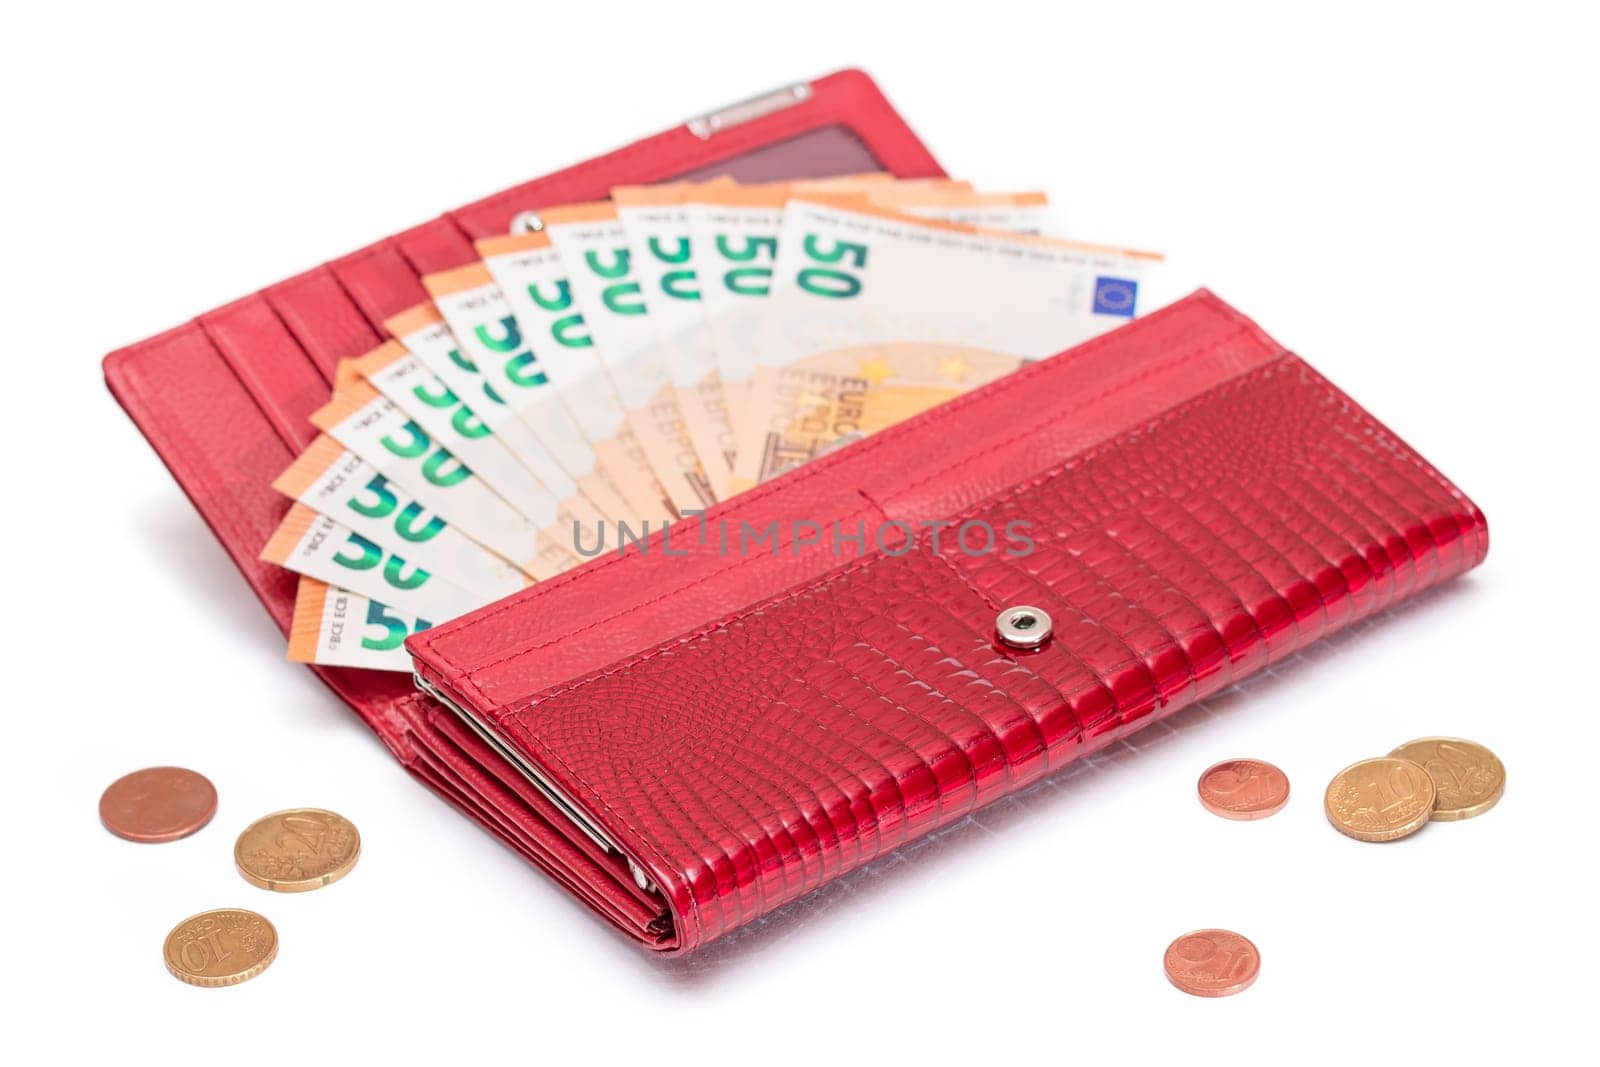 Opened Red Women Purse with 50 Euro Banknotes Inside and Scattered Euro Cent Coins - Isolated on White Background. A Wallet Full of Money Symbolizing Wealth, Success, Shopping and Social Status - Isolation